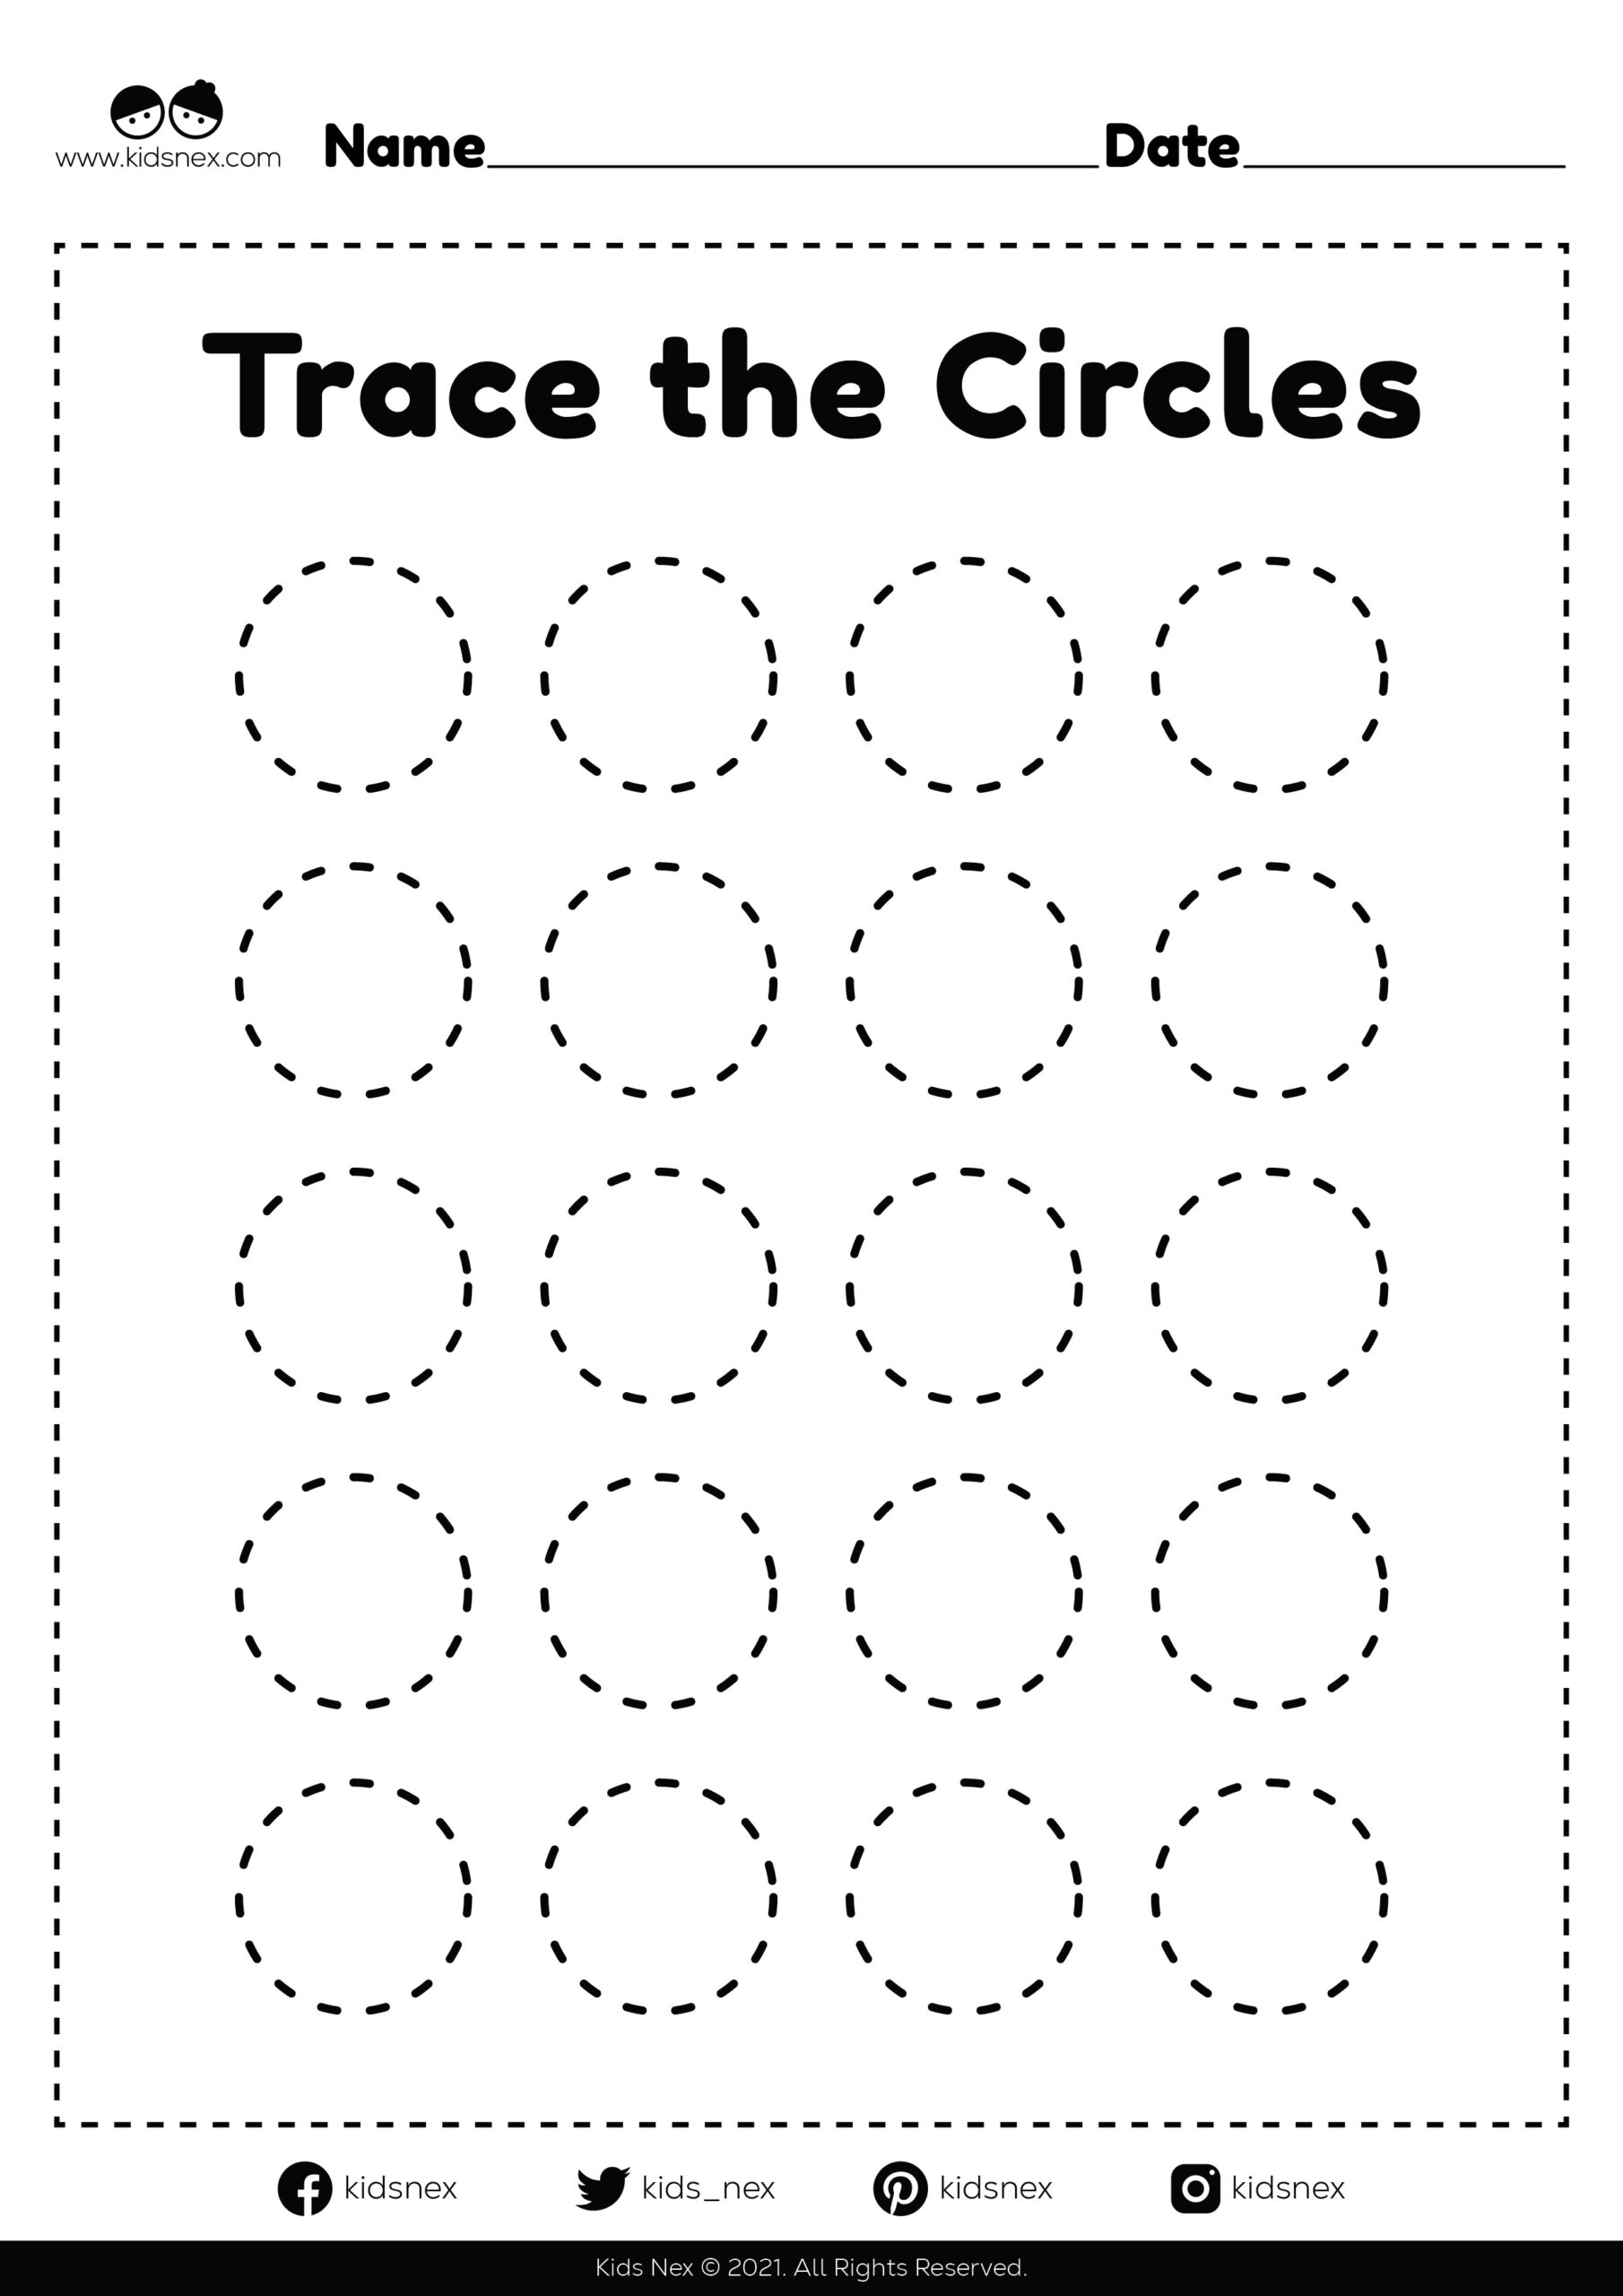 Circle shape worksheet for kindergarten and preschool kids free printable for daily fun and activities.